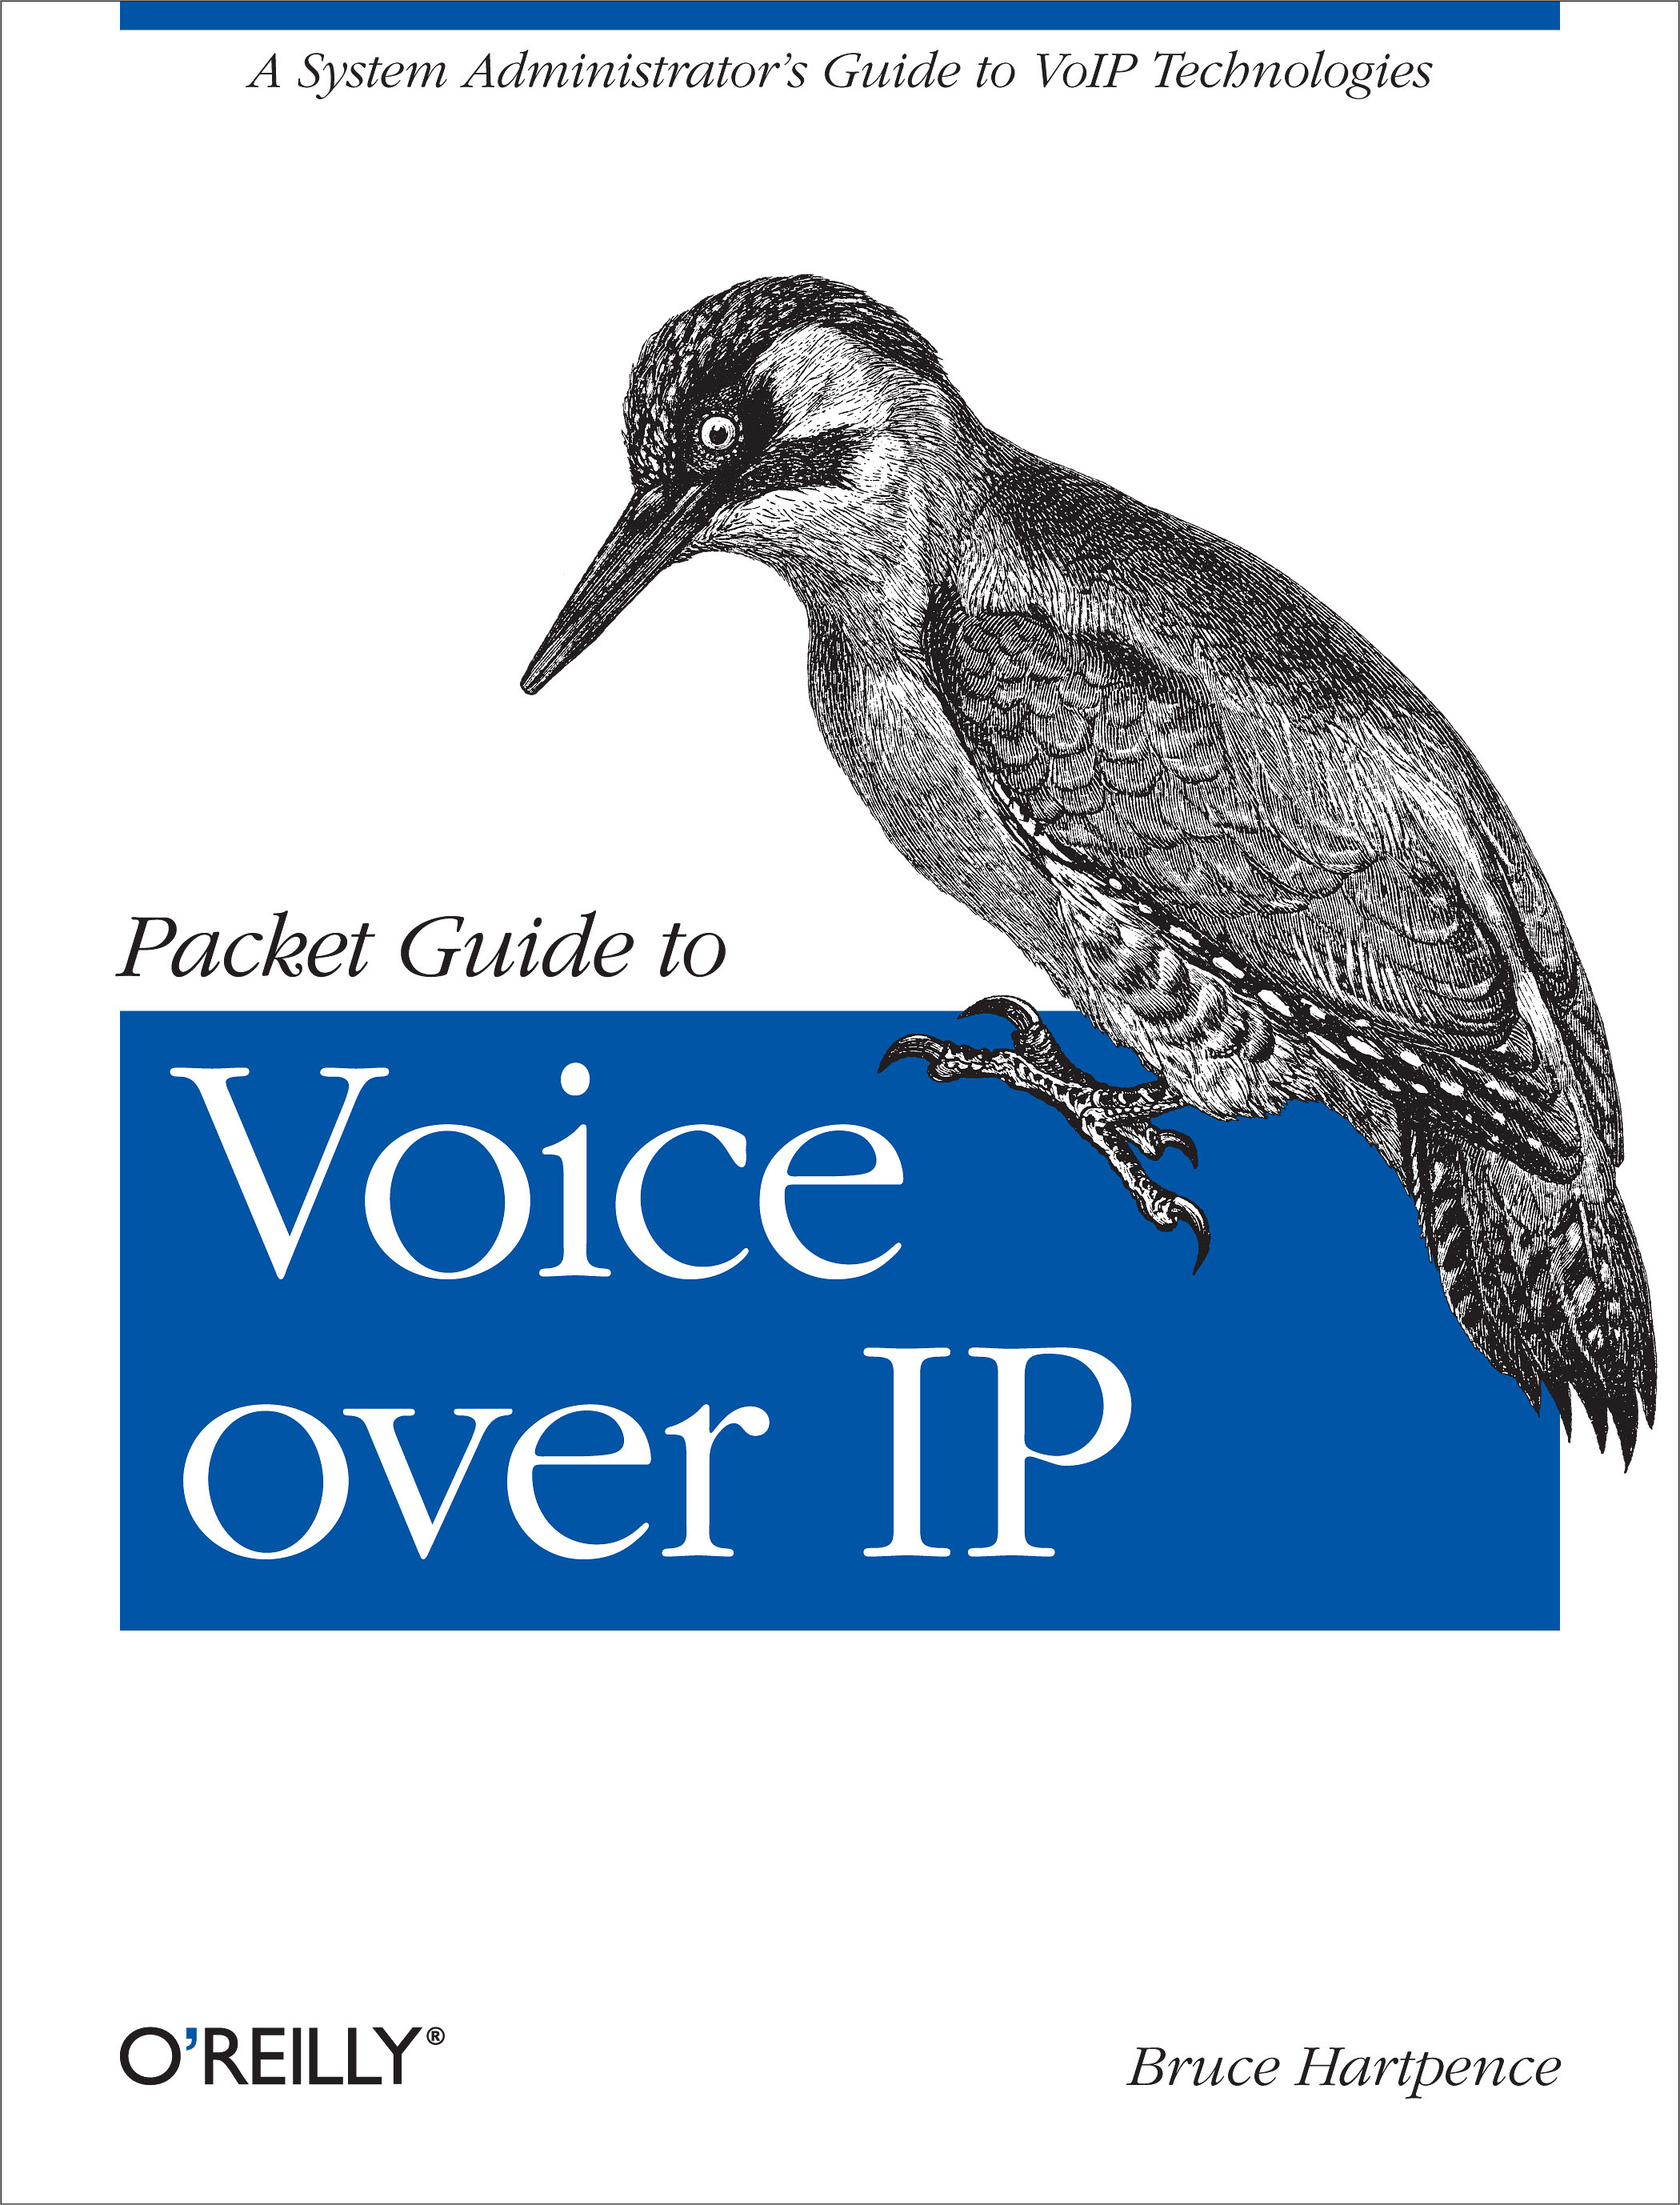 Packet Guide to Voice over IP - 10-14.99